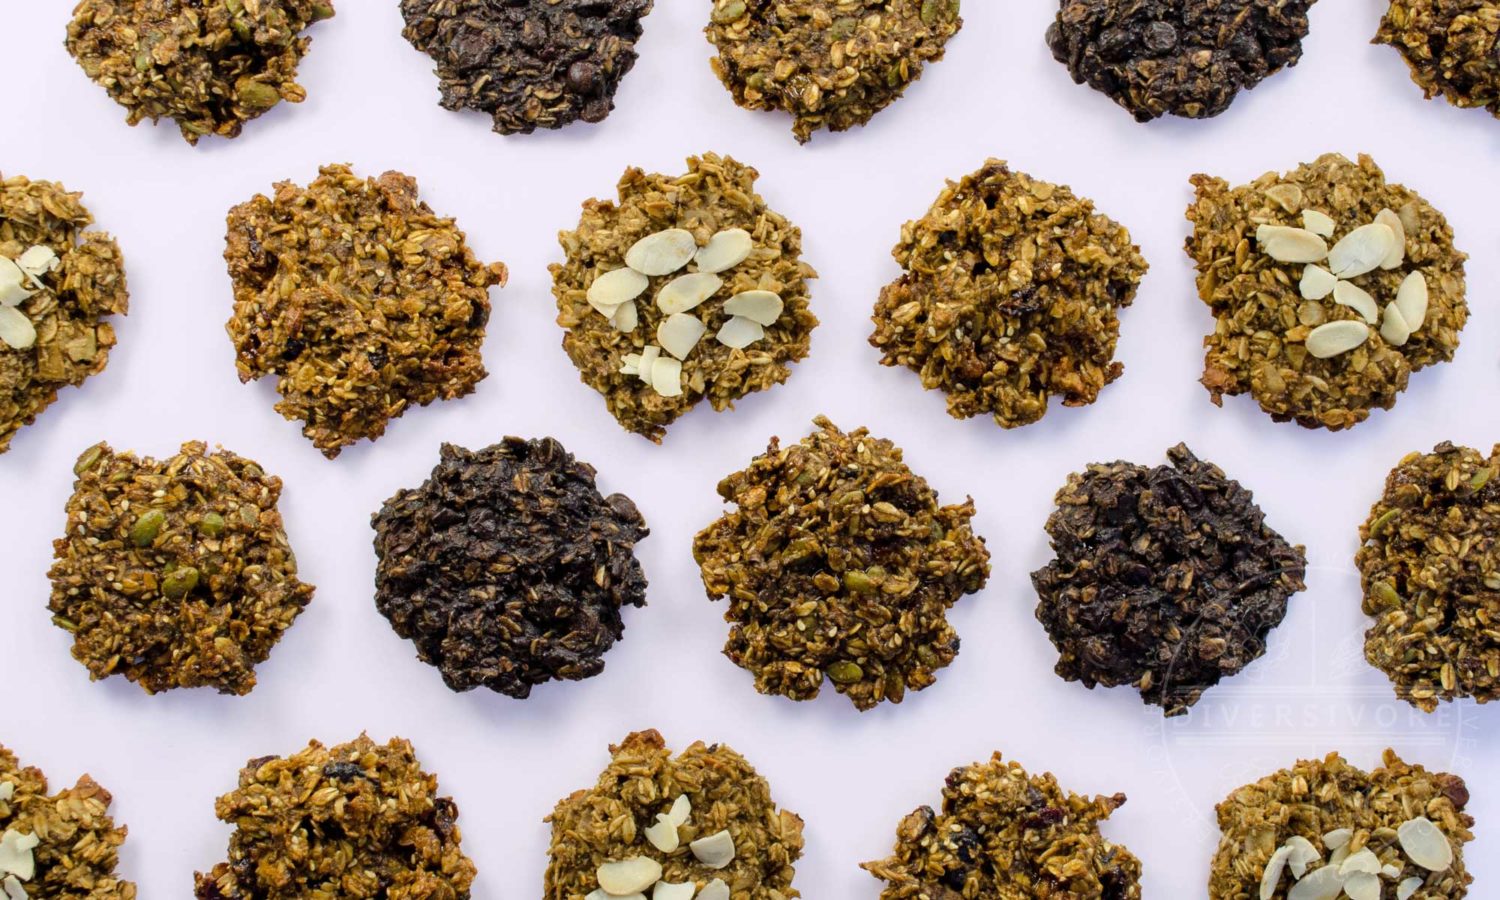 High protein breakfast cookies with four different variations